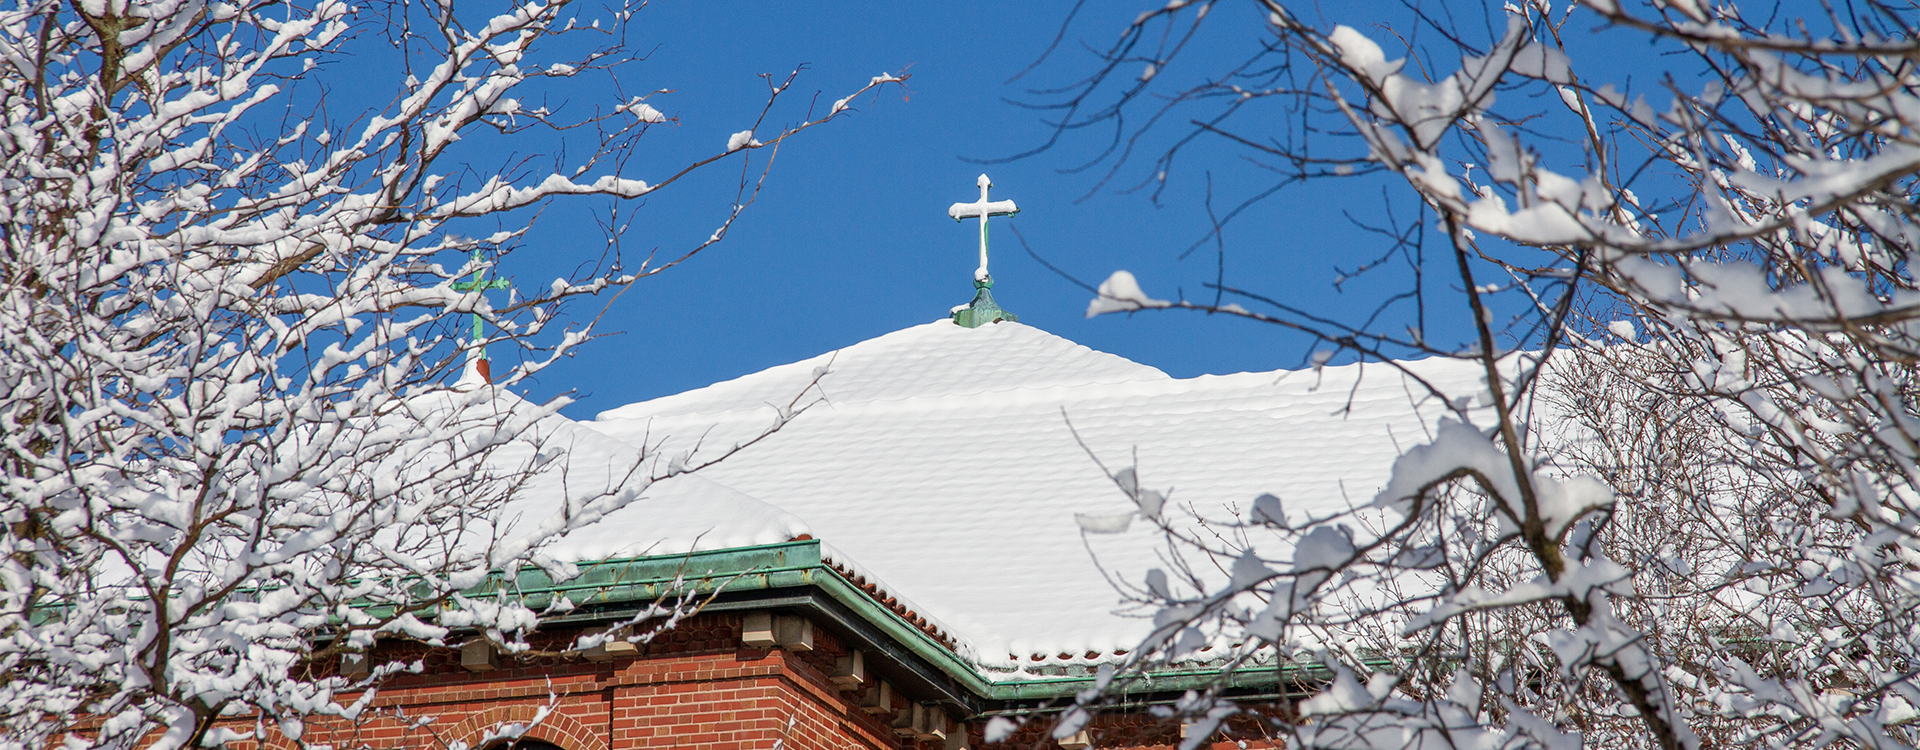 Snow on a rooftop cross